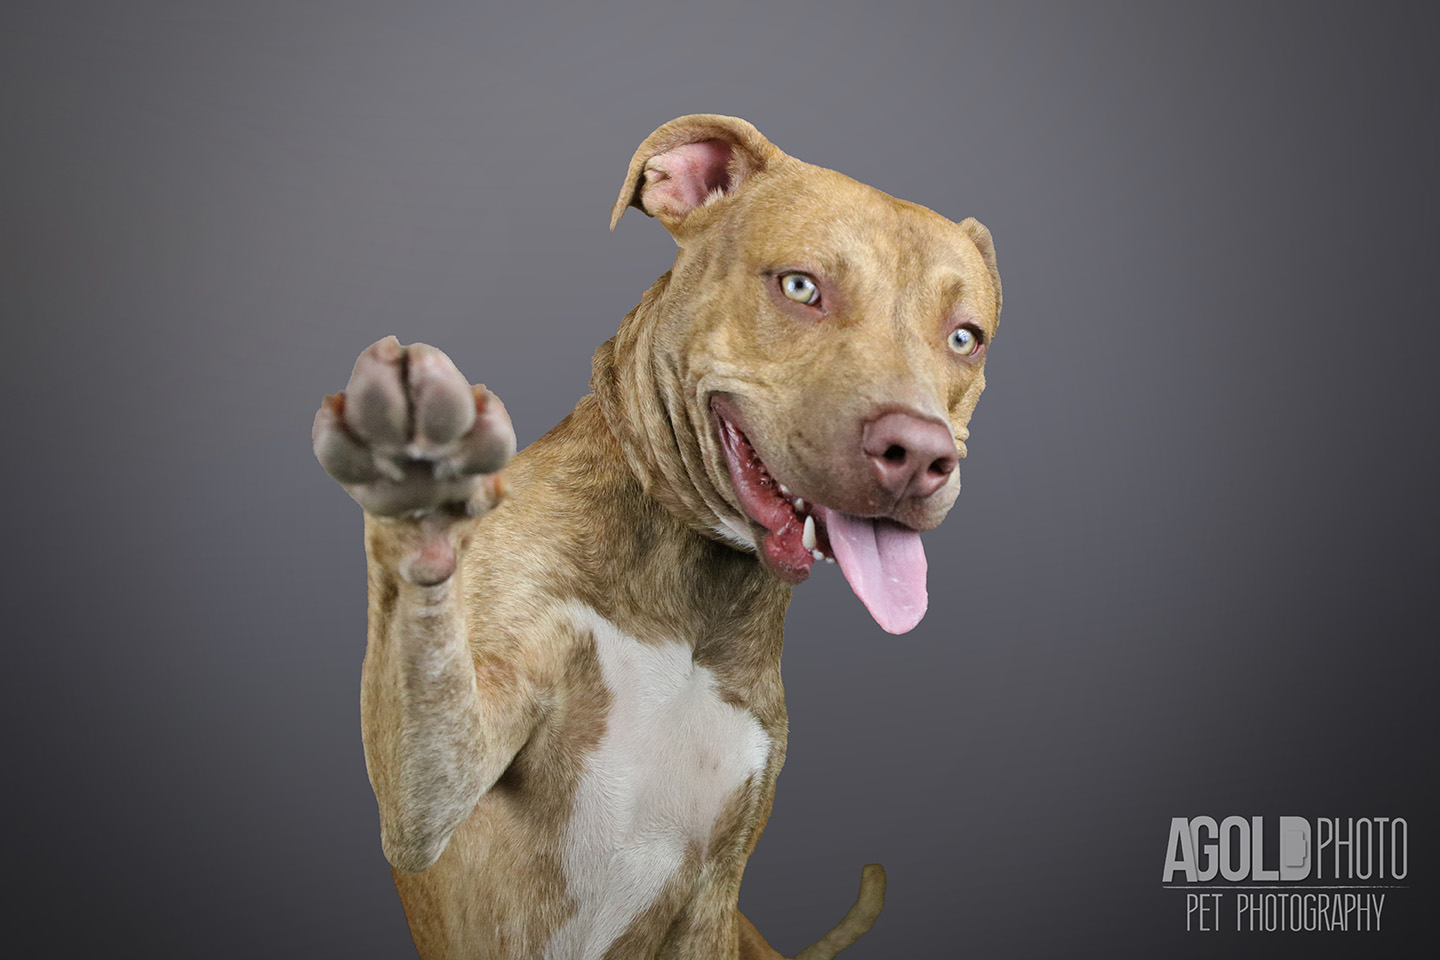 trevor-2_agoldphoto-tampa-pet-photography__agoldphoto-tampa-pet-photography_